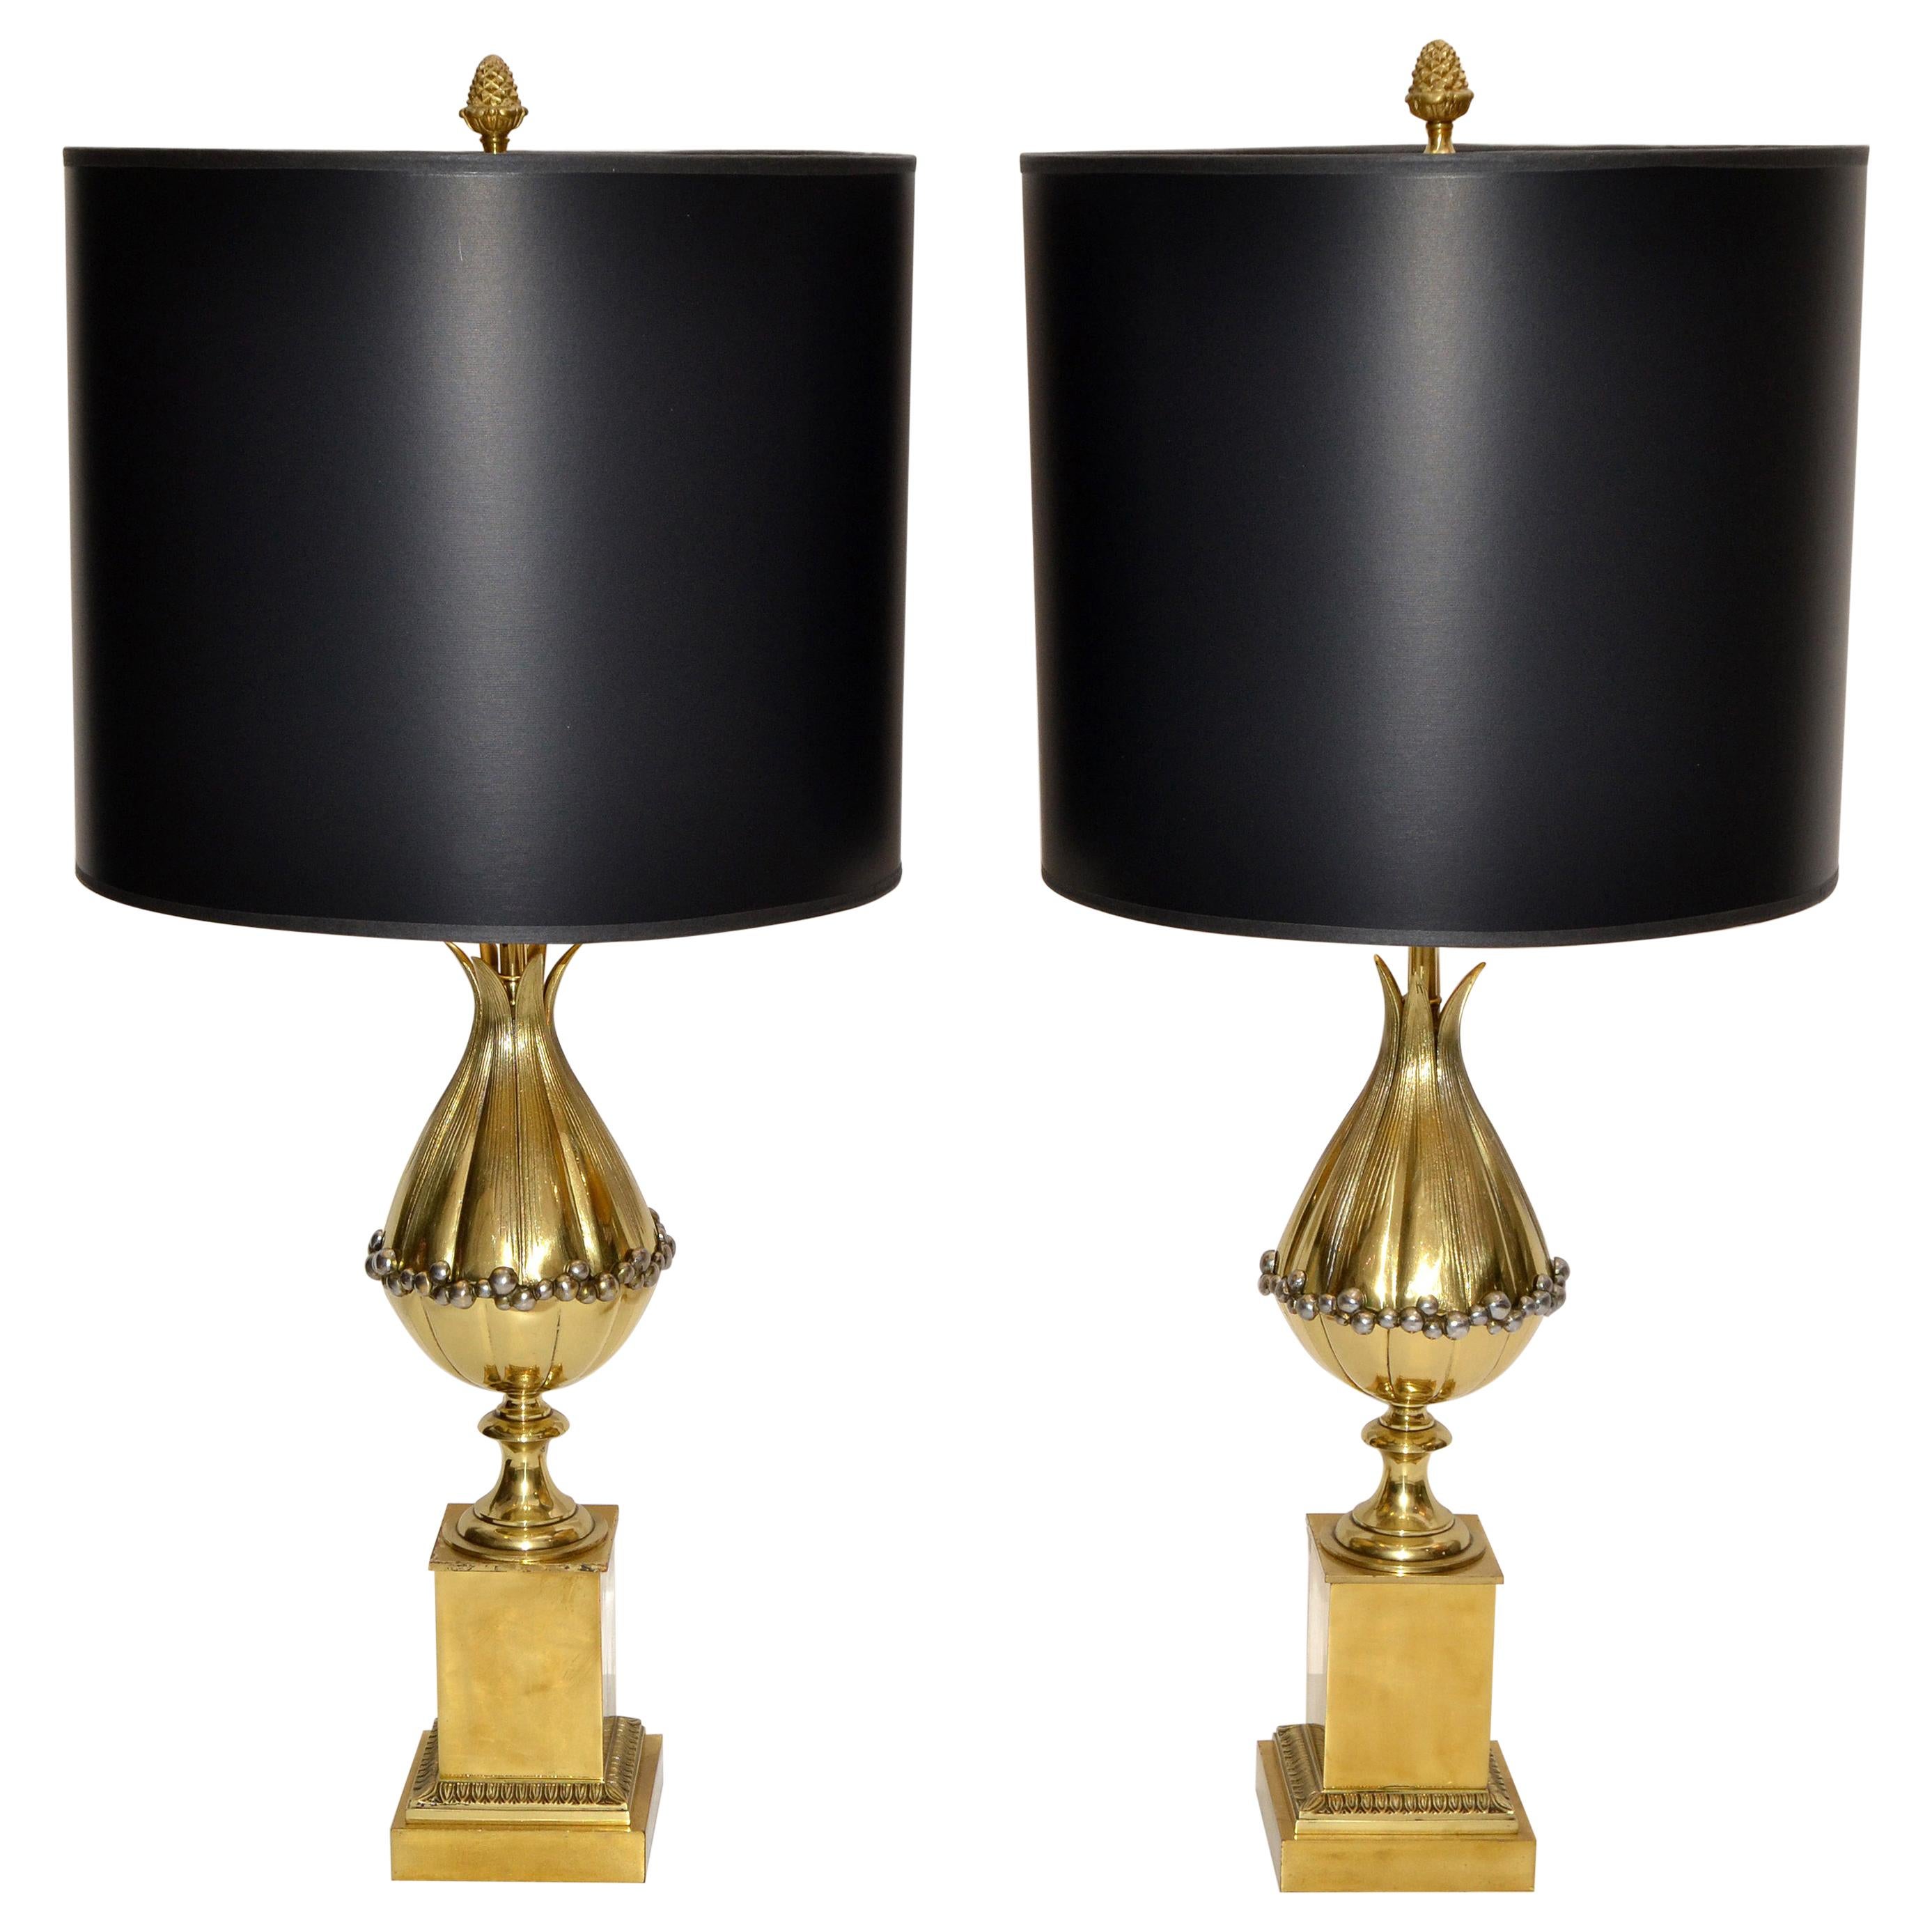 Maison Charles French Art Deco Lotus Bronze Table Lamp Black & Gold Shade, Pair